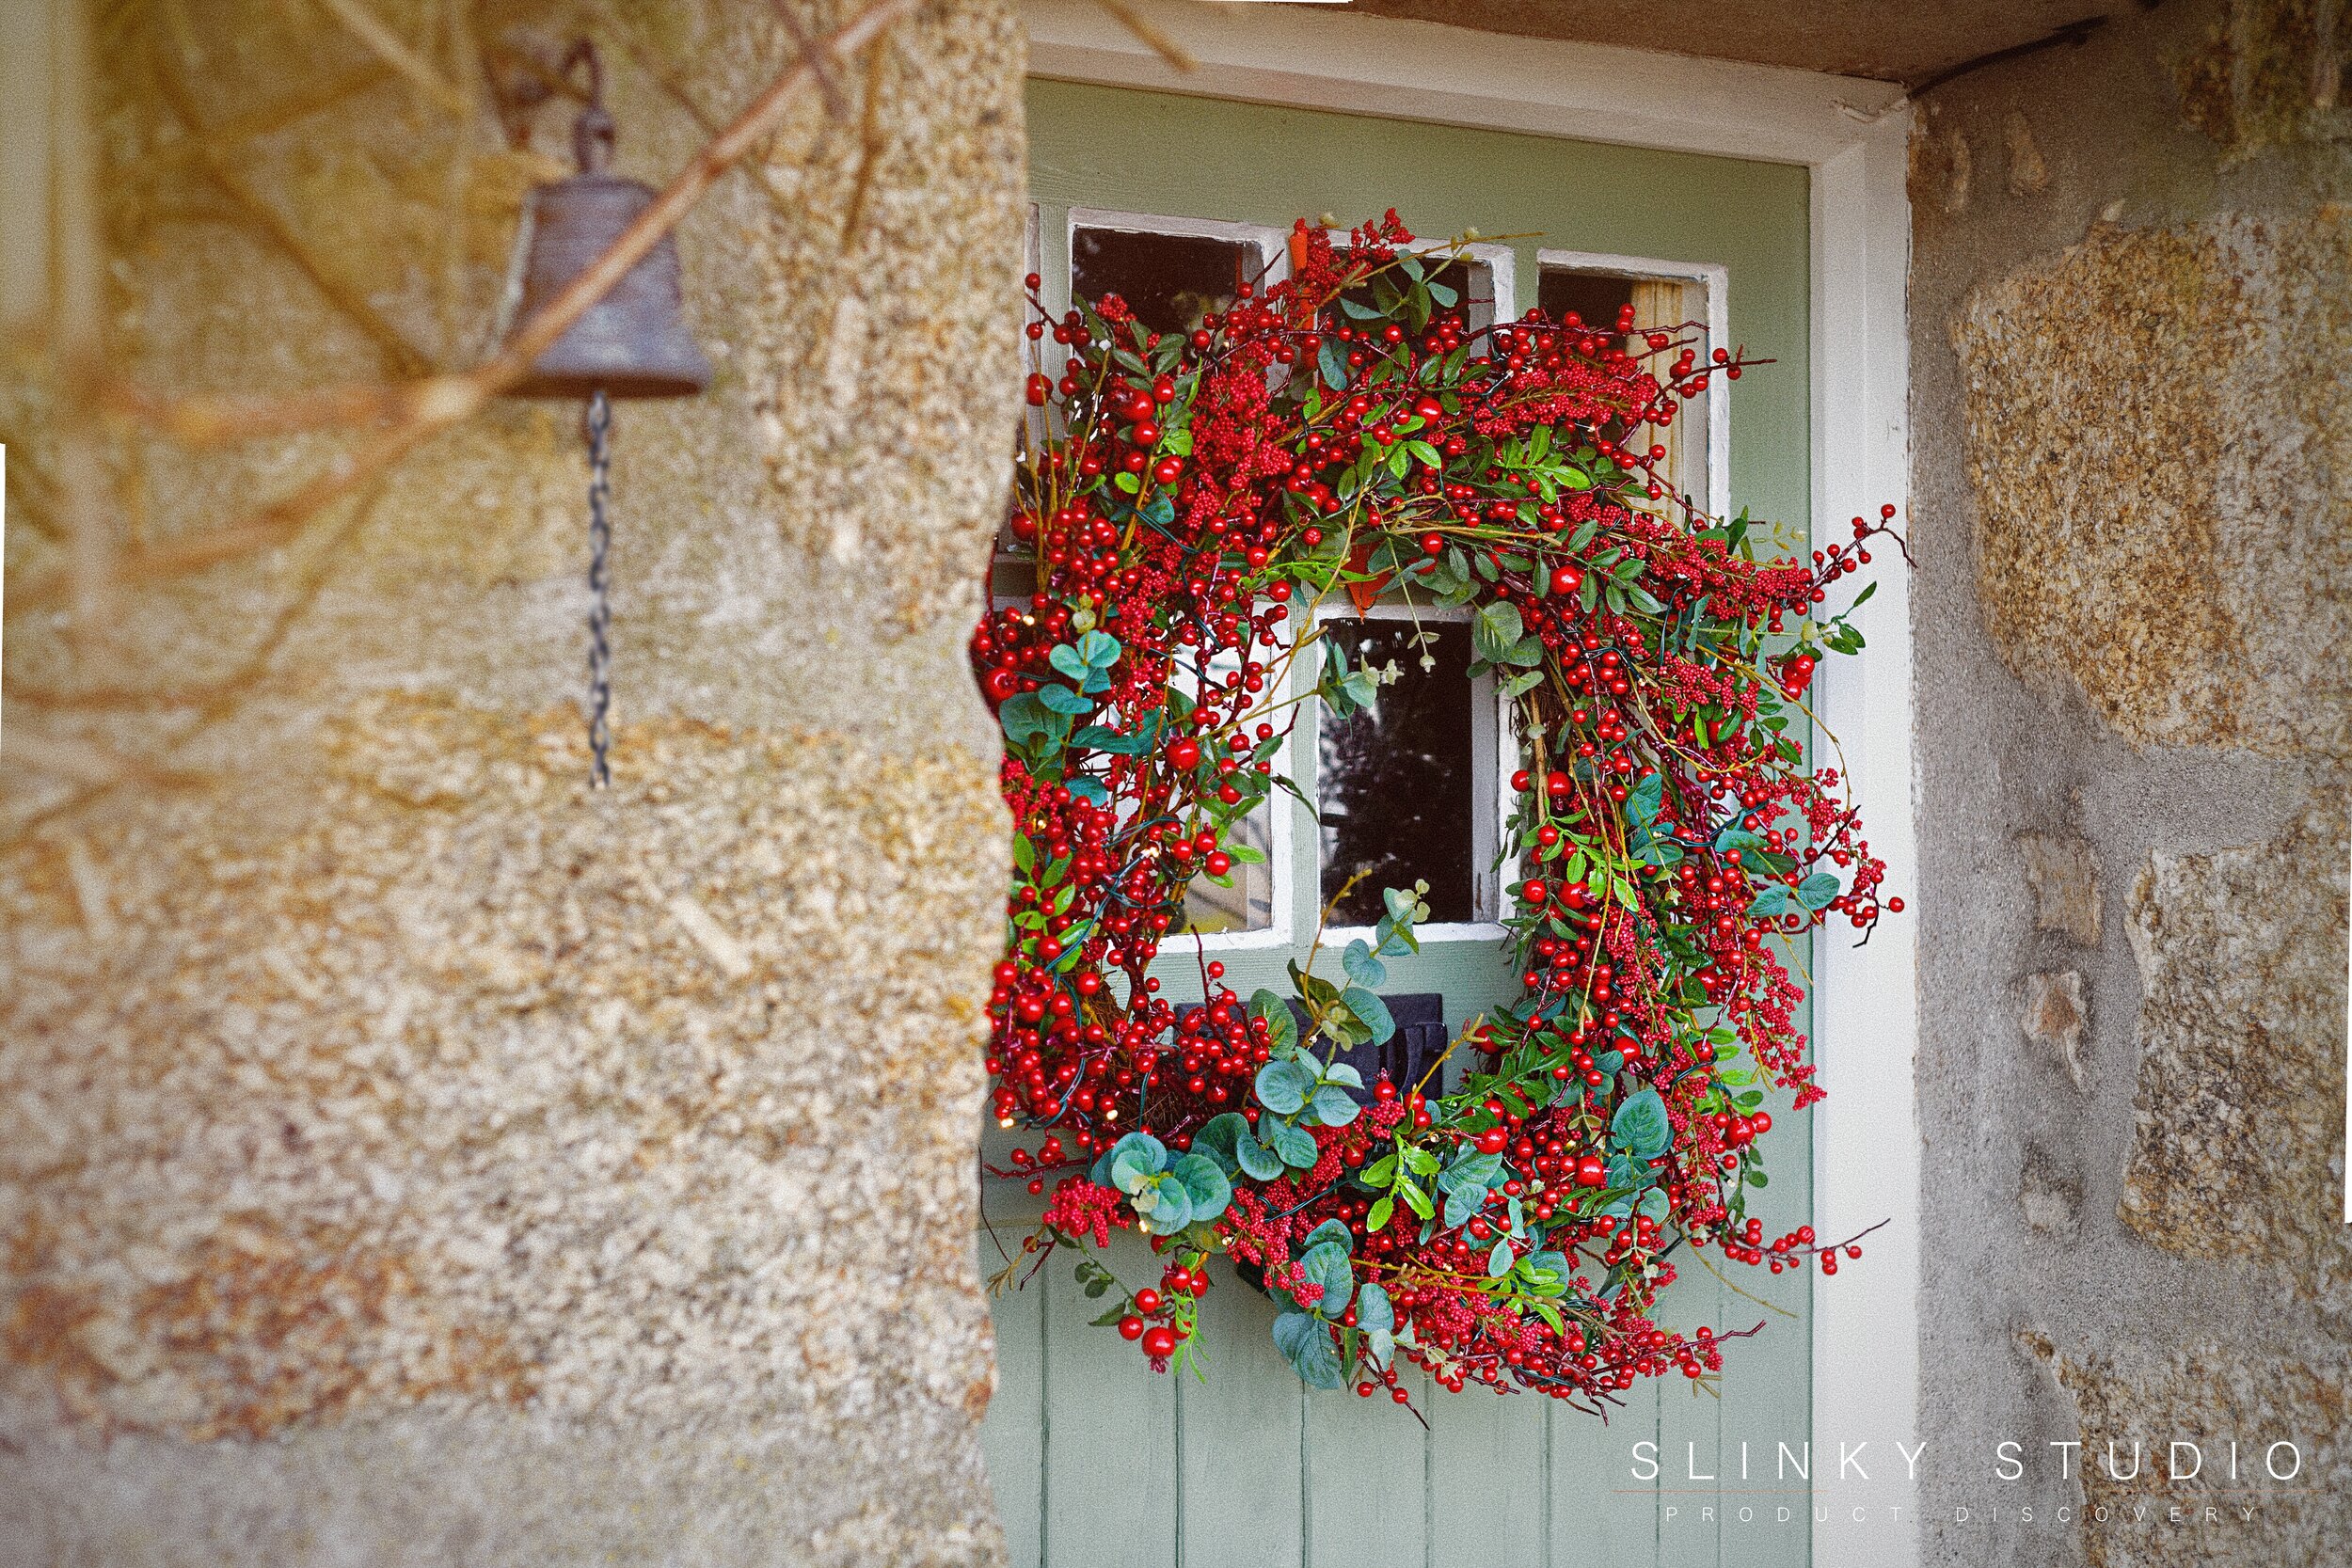 Balsam Hill Mixed Berry Festive Wreath Hanging on Door Sunny Winter Day Cottage.jpg